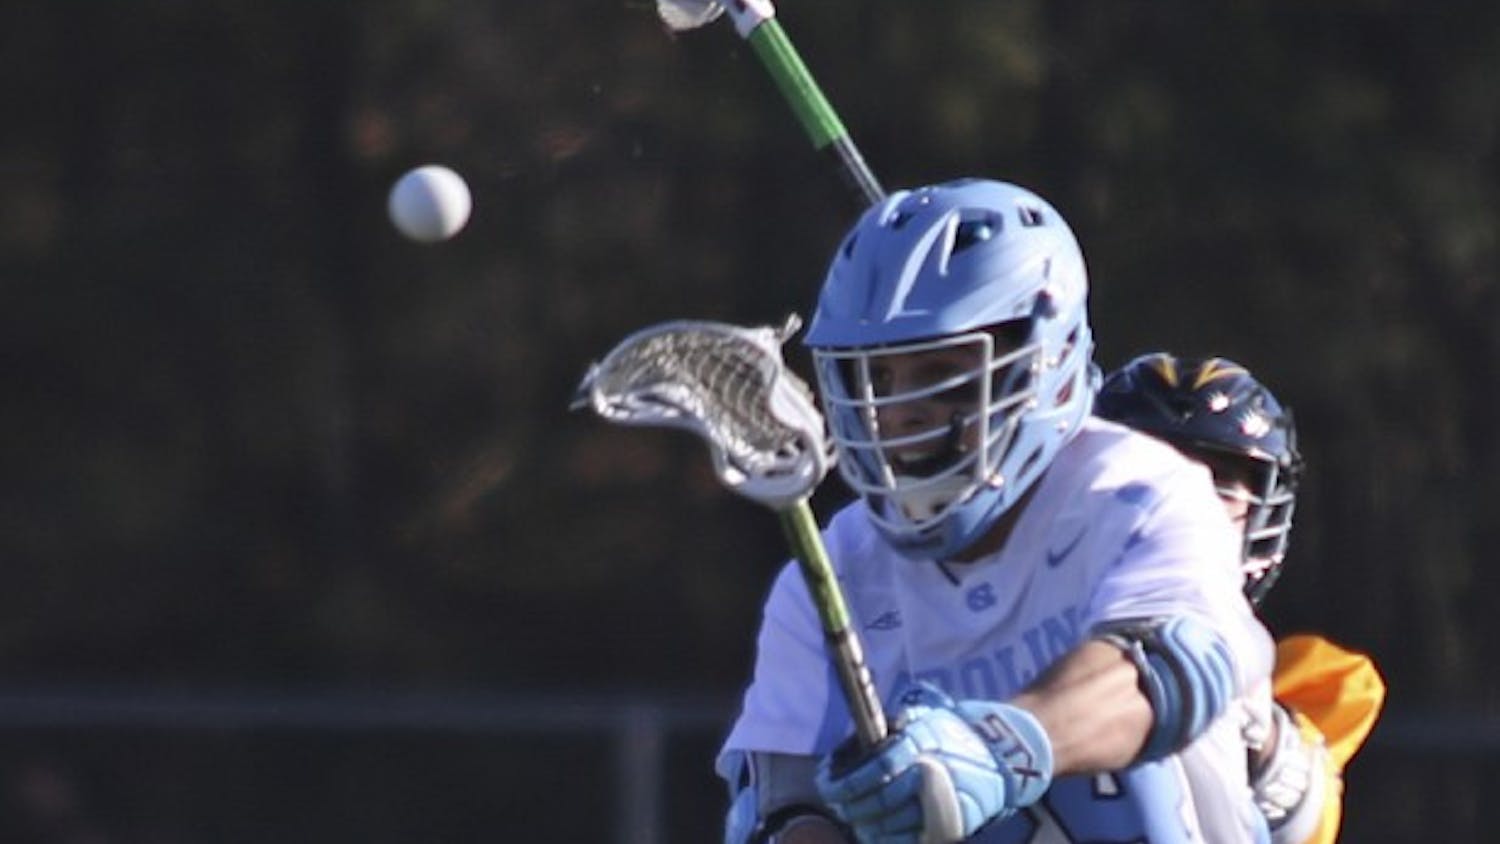 UNC midfielder Stephen Kelly (24) fires a shot after winning a face-off against UMBC on Saturday at Cardinal Gibbons High School in Raleigh.